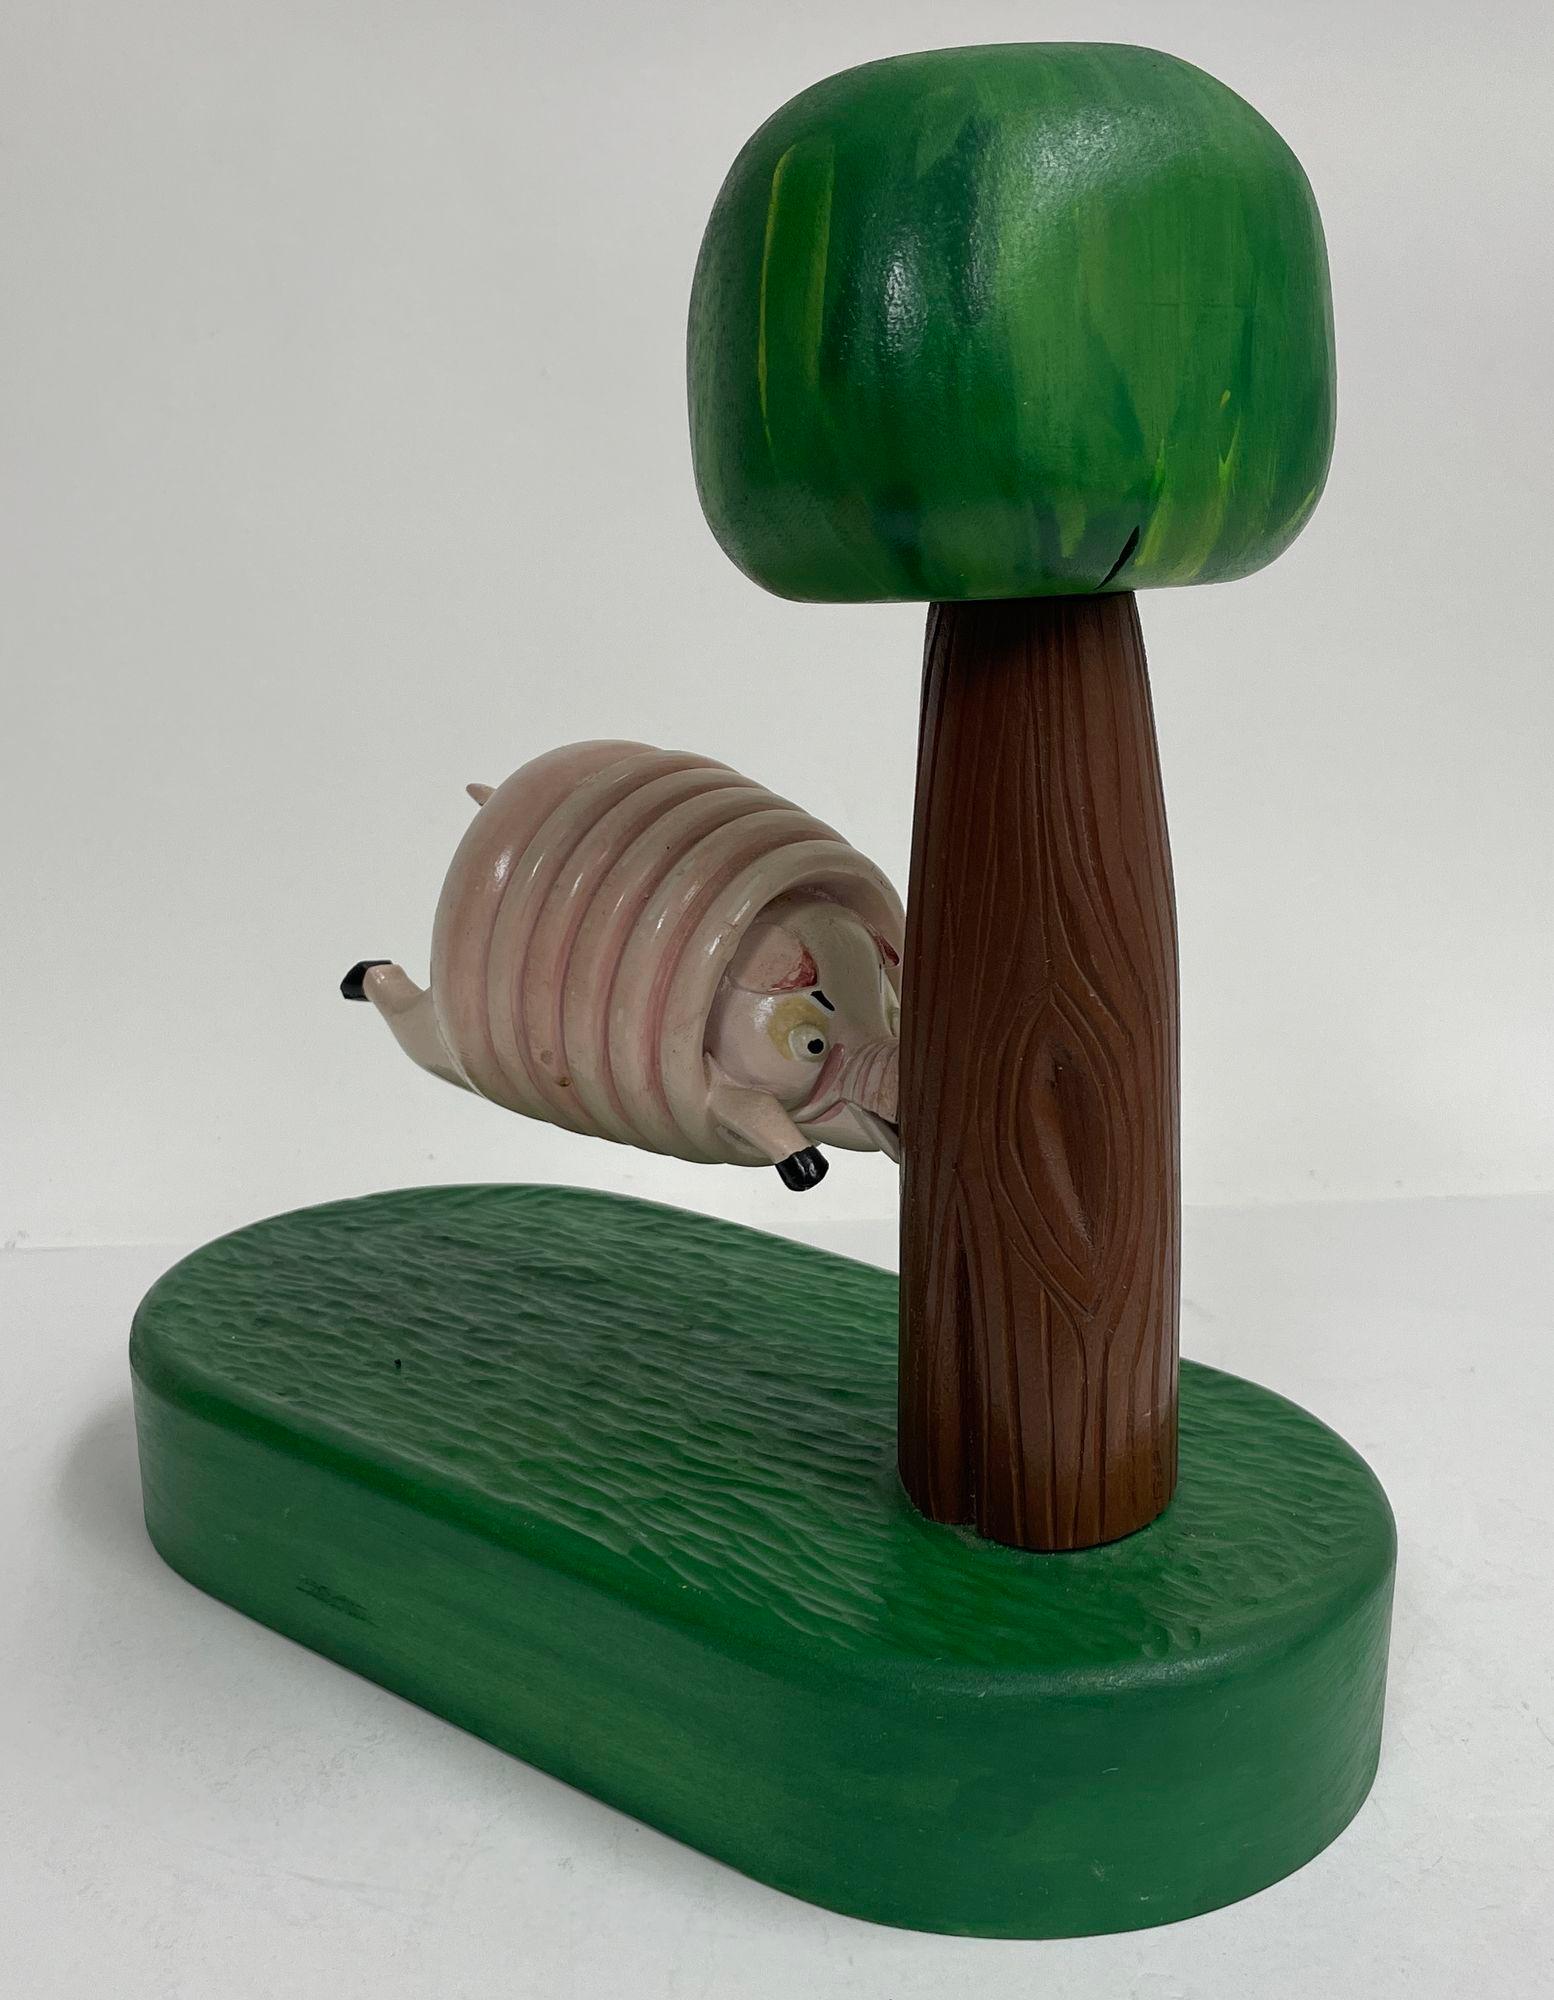 Vintage Folk Art Wood Sculpture of a Pig Running into a Tree by R. Harper 1991 In Good Condition For Sale In North Hollywood, CA